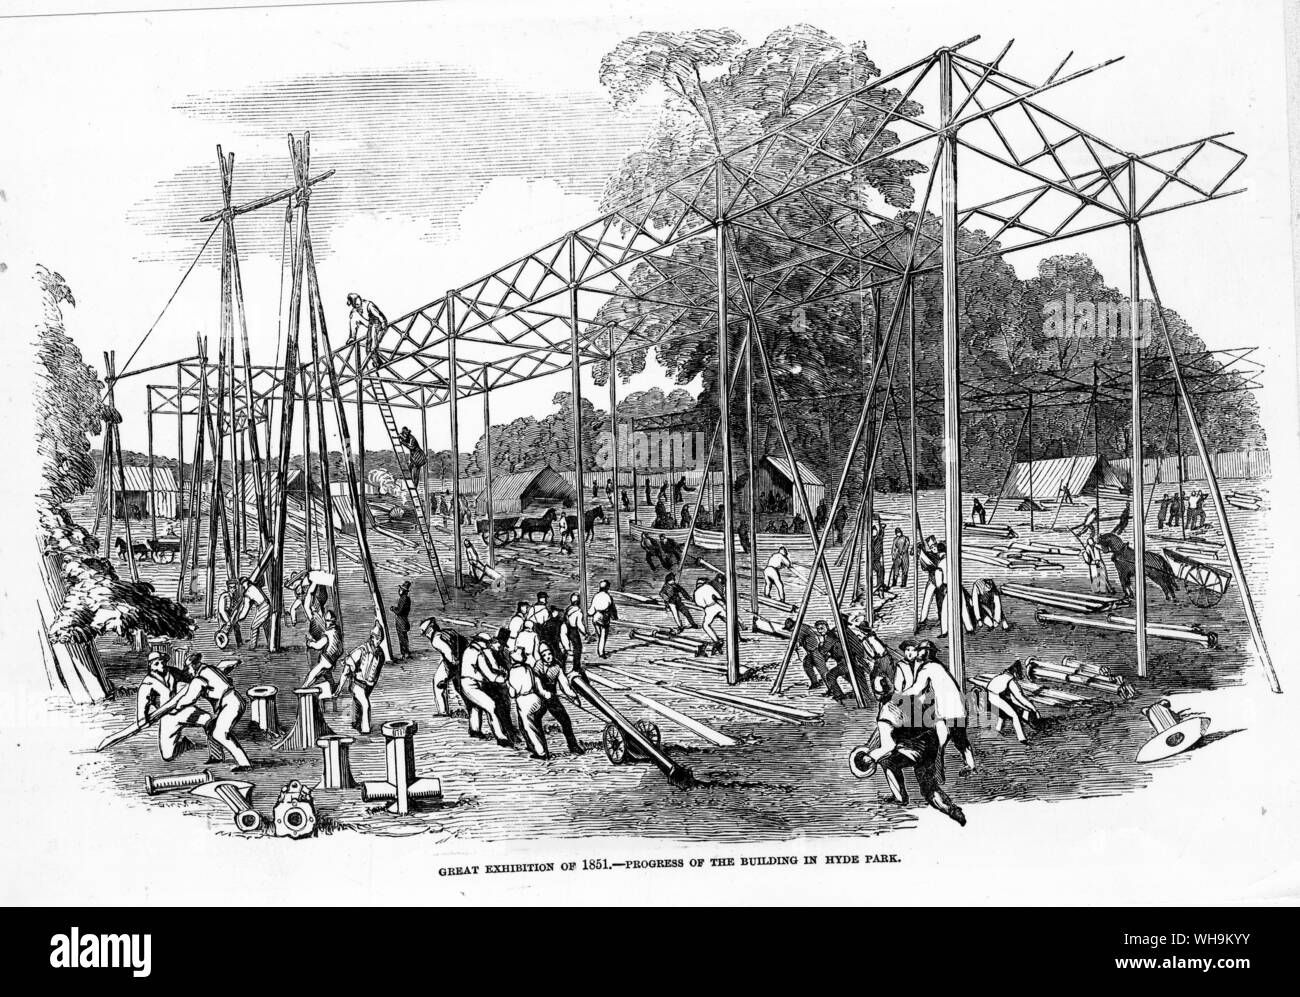 The Great Exhibition of 1851 - progress of the building in Hyde Park.' . Illustrated London News Oct. 12th 1850. Stock Photo